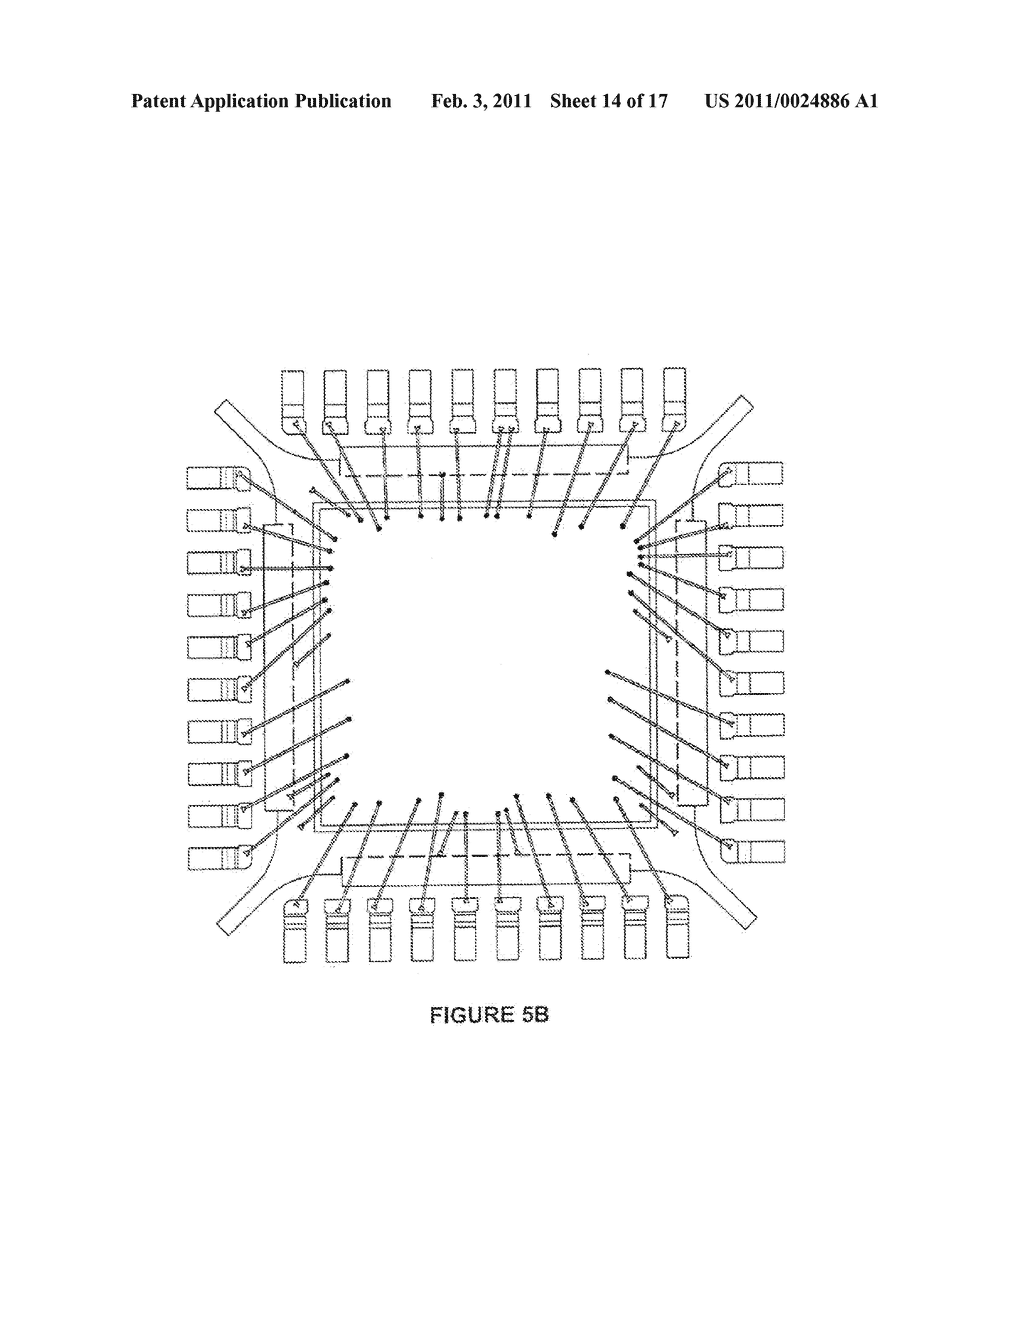 SEMICONDUCTOR DEVICE PACKAGE HAVING FEATURES FORMED BY STAMPING - diagram, schematic, and image 15